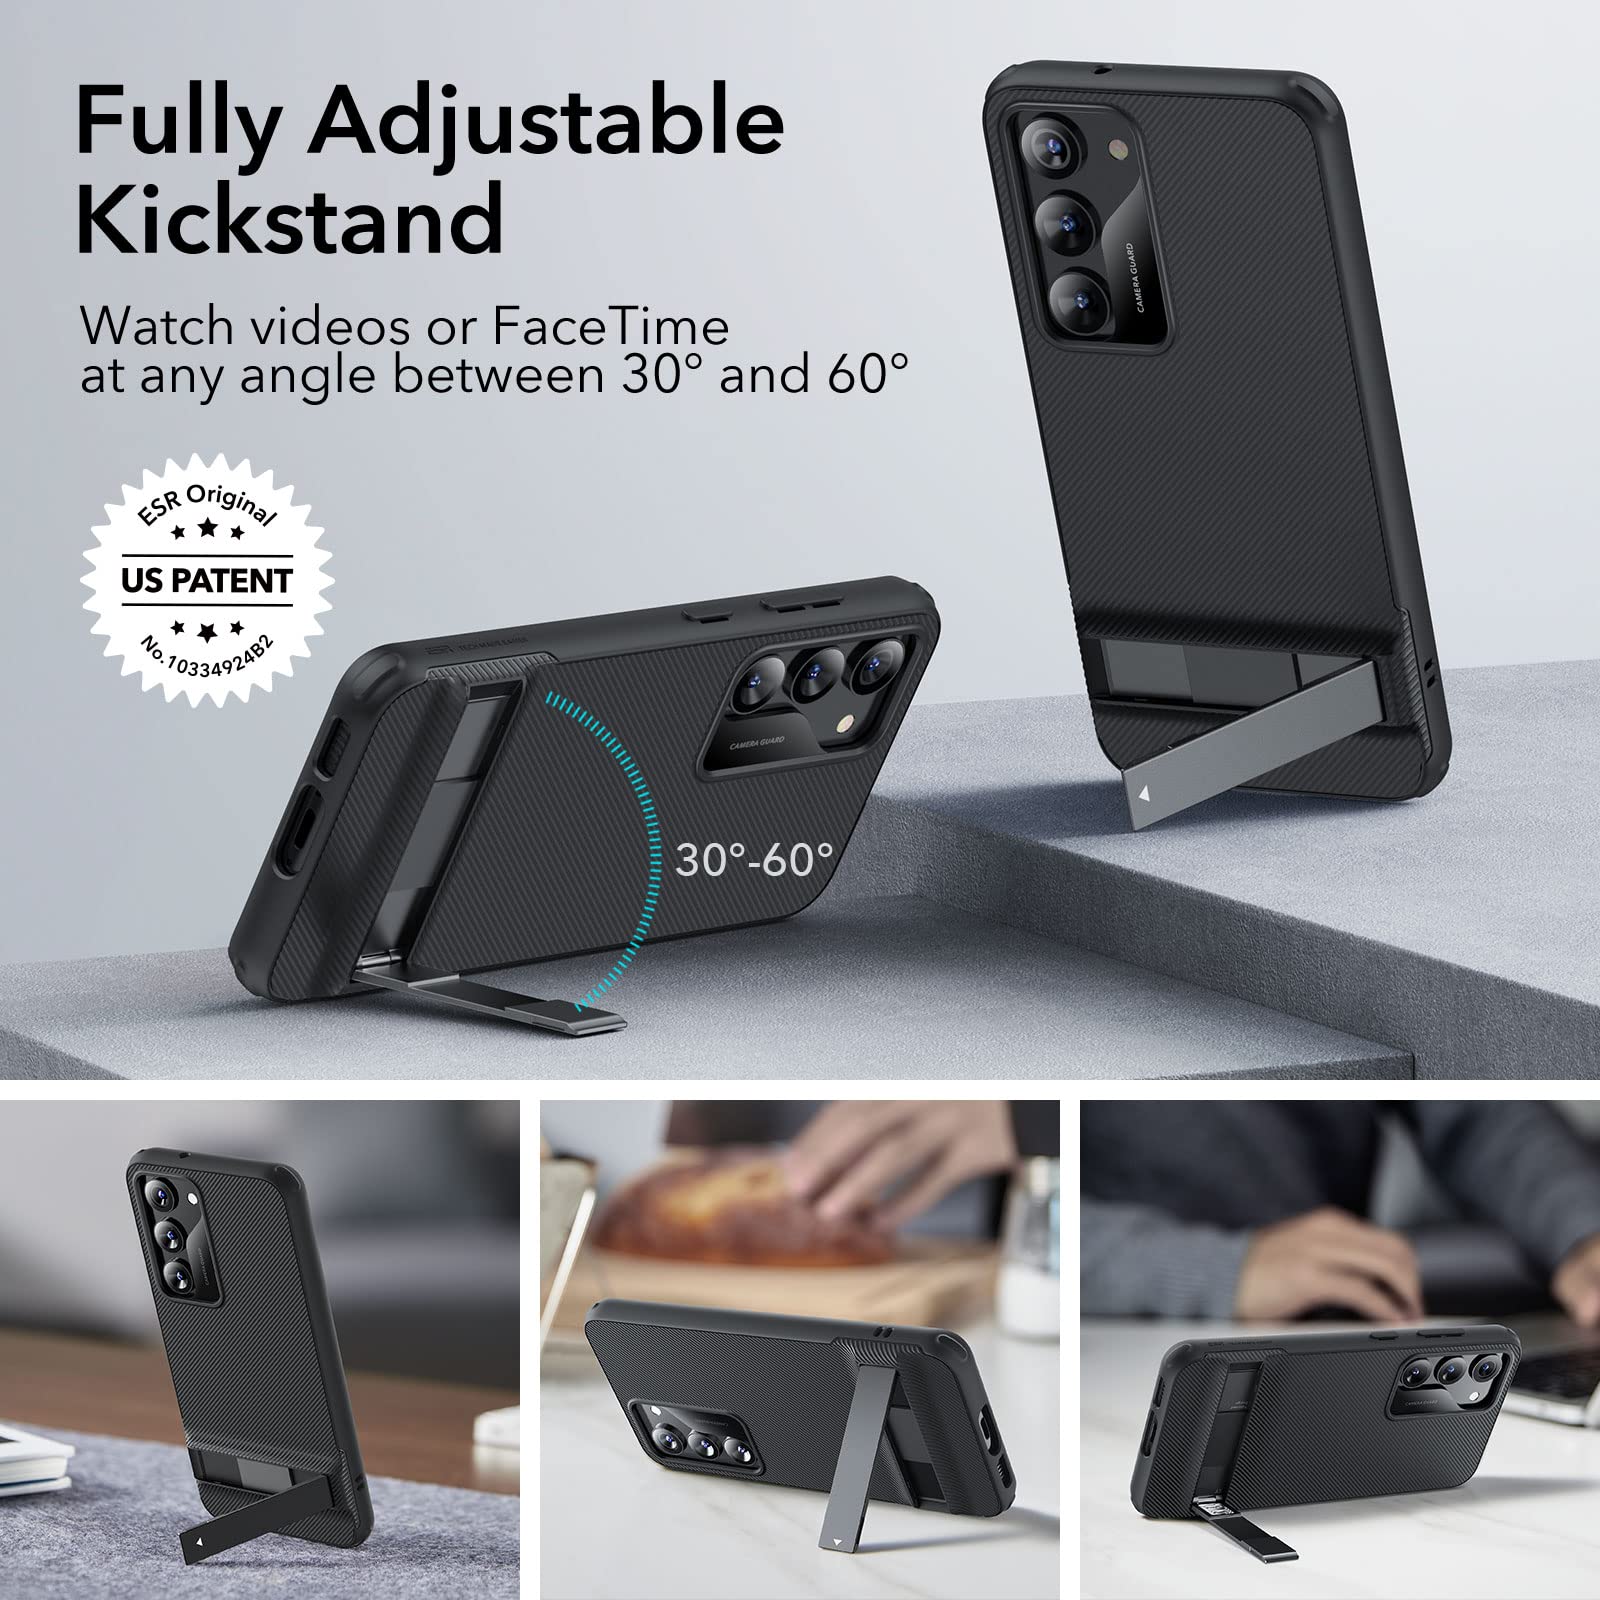 ESR Boost Kickstand Case for Samsung Galaxy S23 Case, 3 Stand Modes, Military-Grade Drop Protection, Supports Wireless Charging, Slim Phone Cover with Patented Kickstand, Black